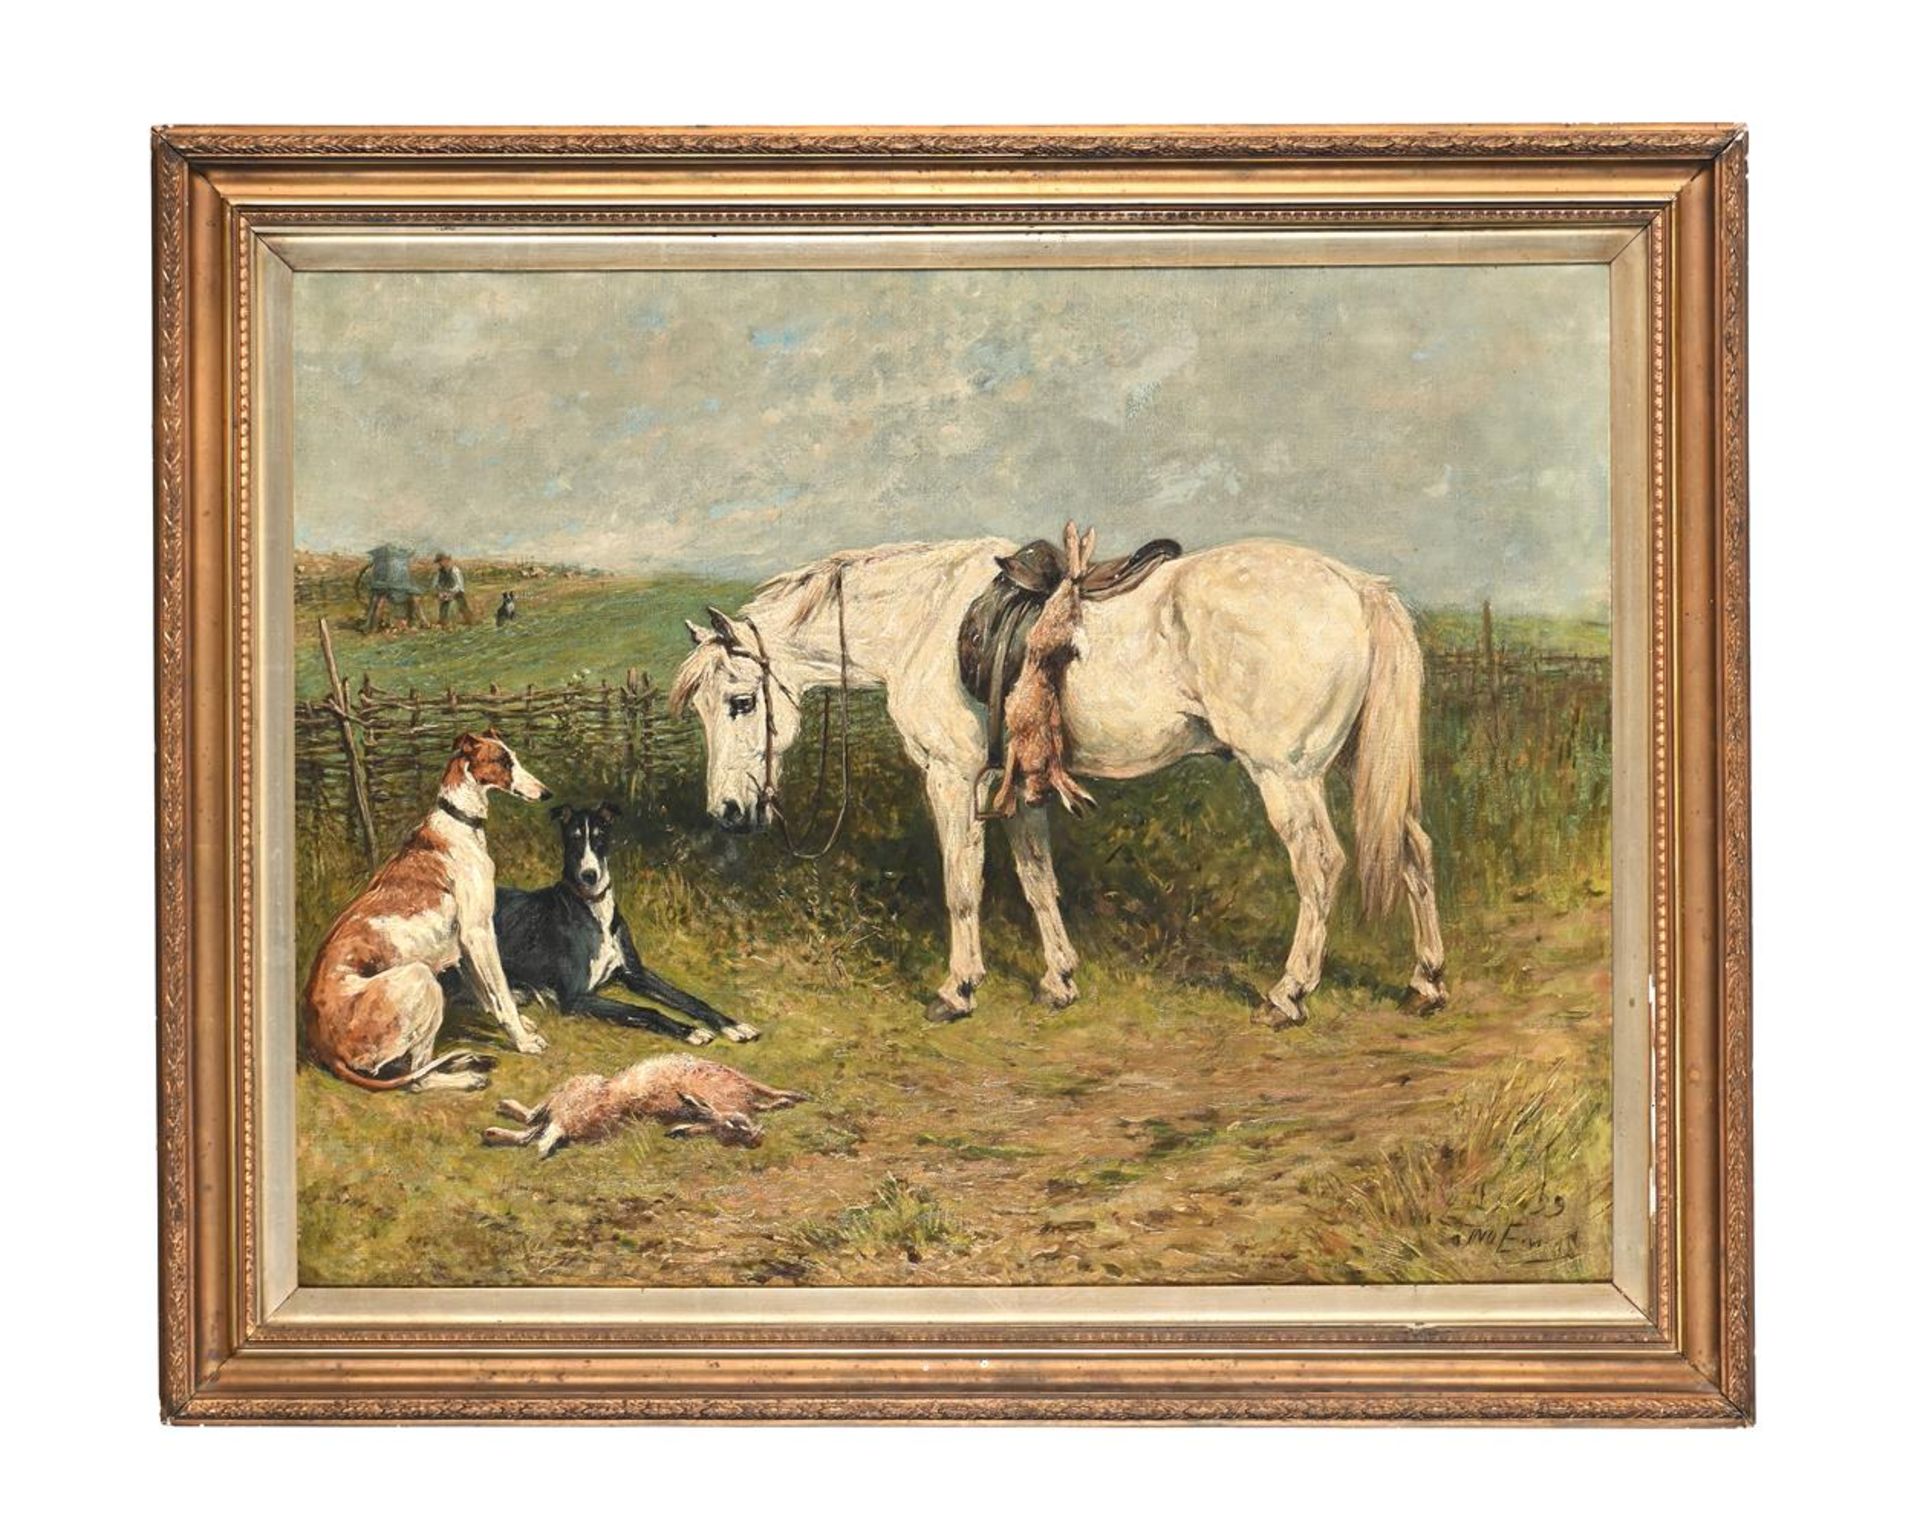 JOHN EMMS (BRITISH 1844-1912), A GREY PONY WITH TWO GREYHOUNDS AND A HARE - Image 2 of 3